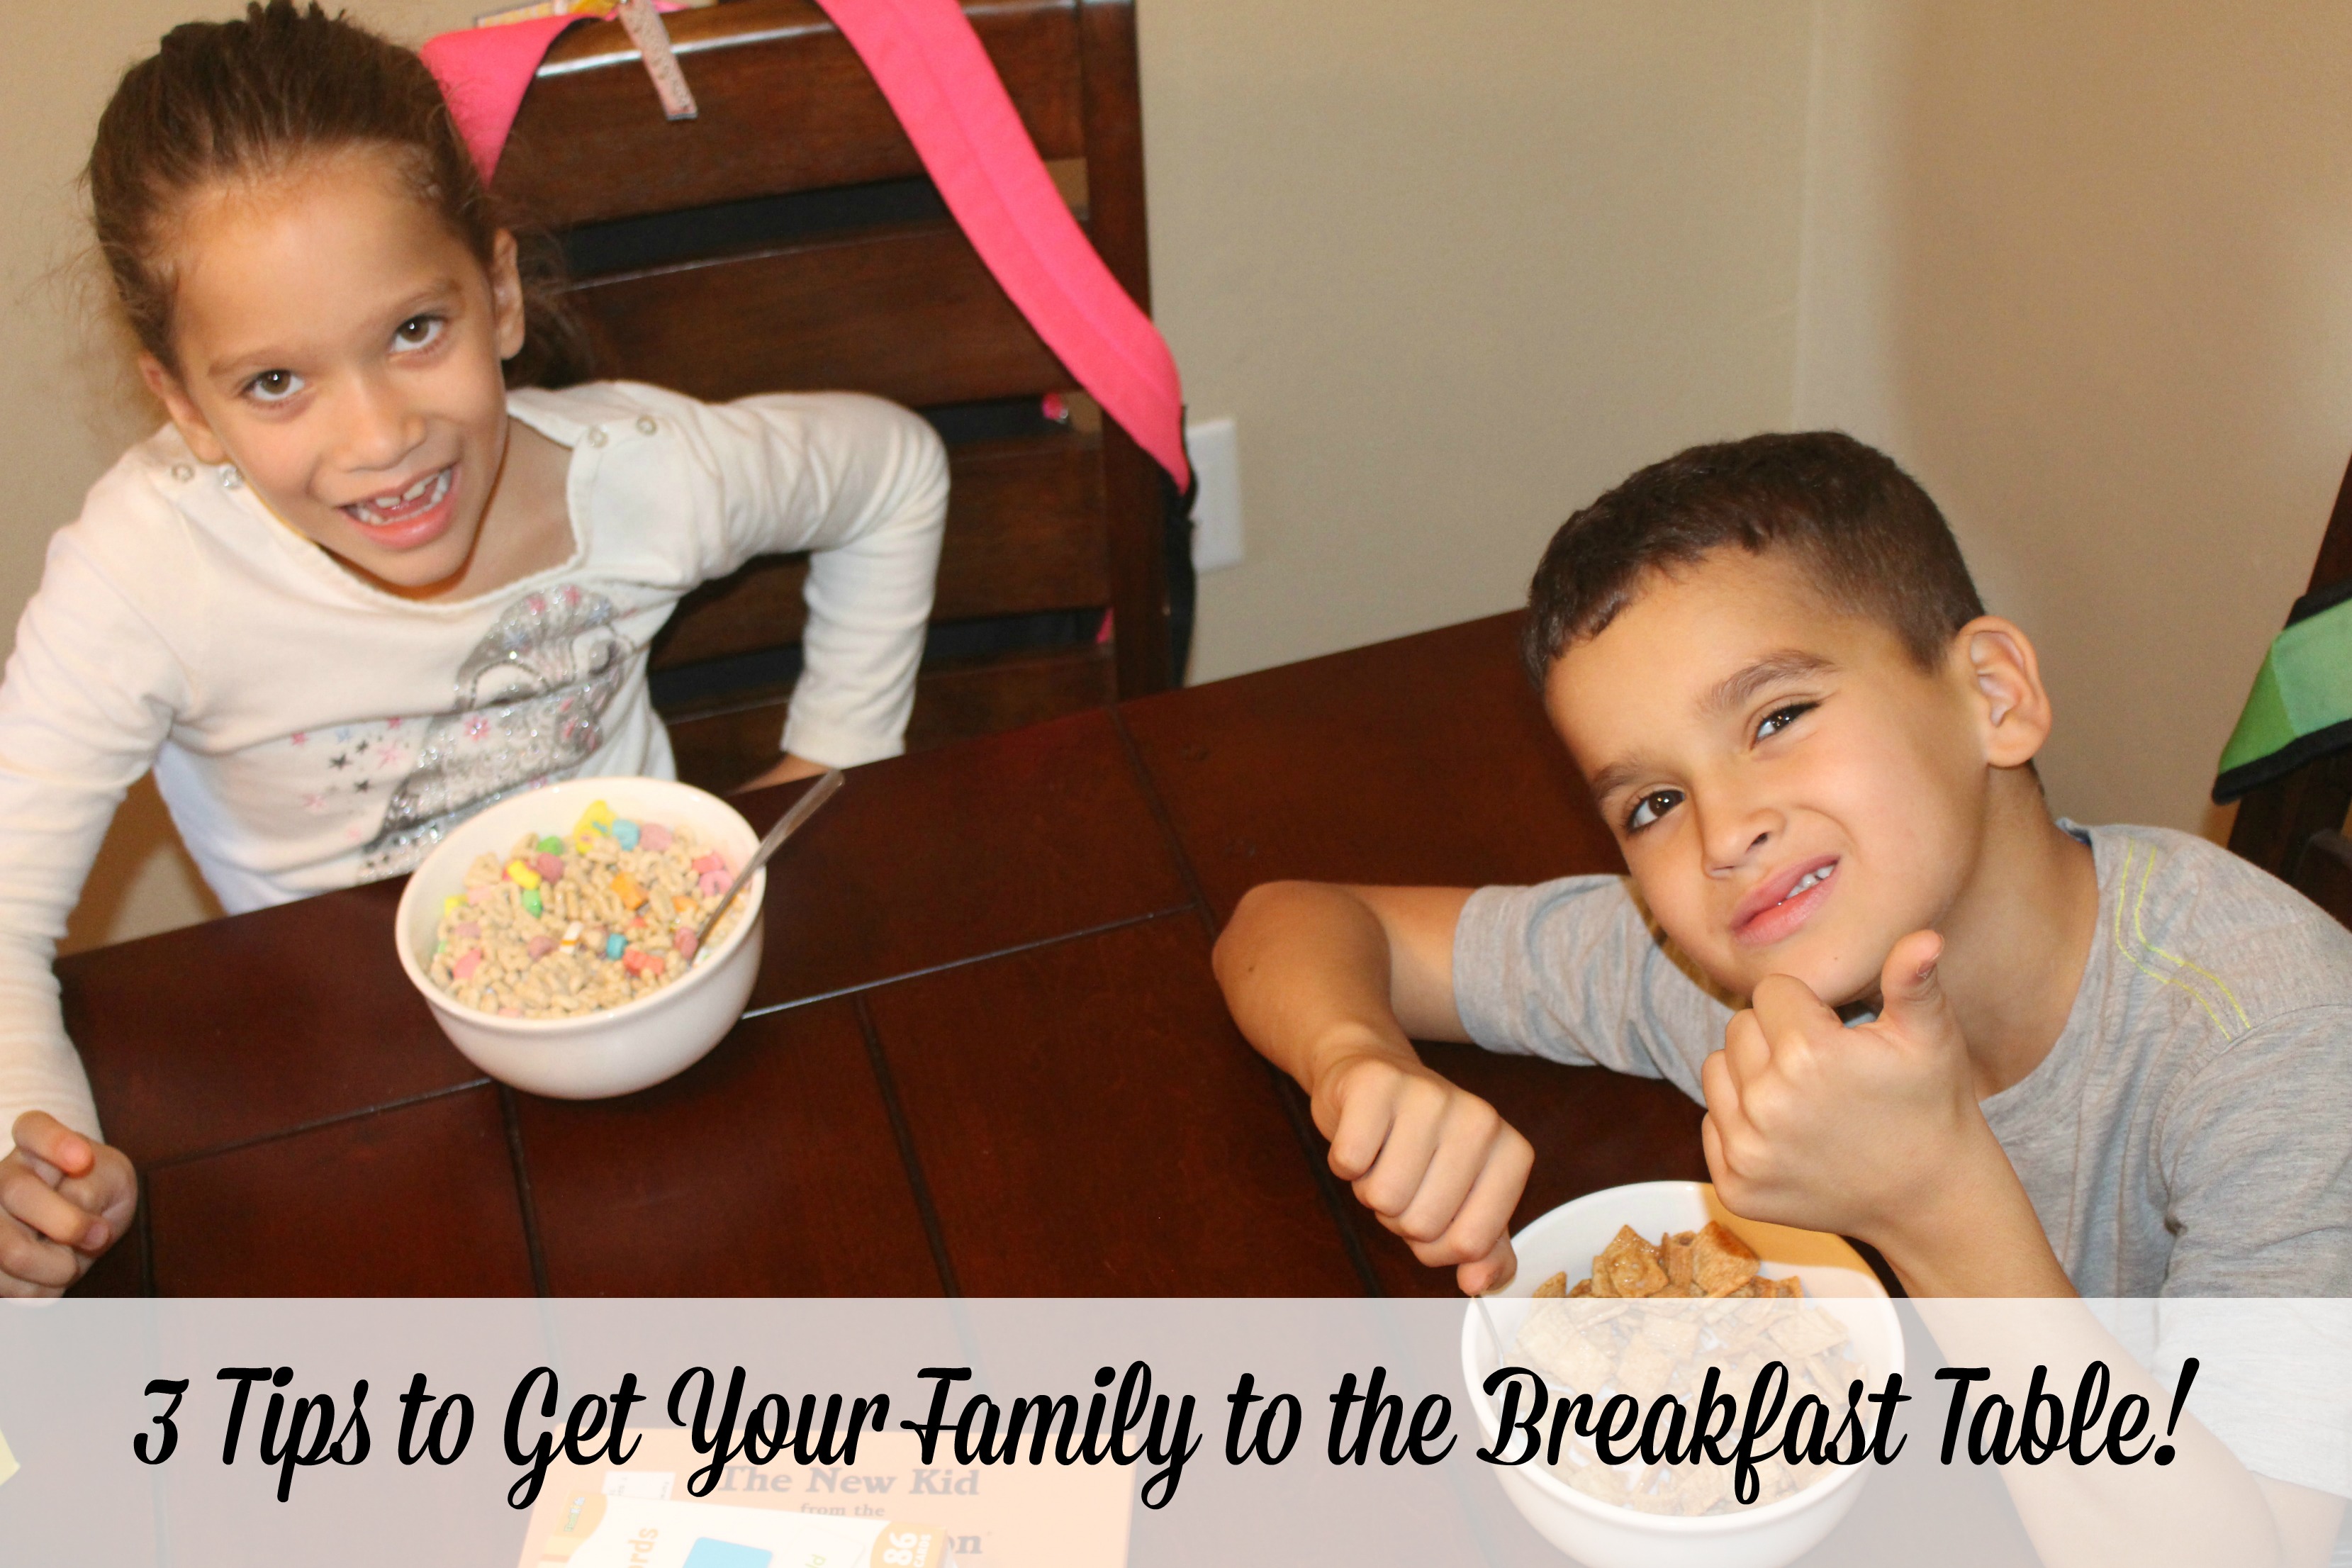 3 Tips to Get Your Family to the Breakfast Table + A Great Deal on Big G Cereal #BigGBreakfast